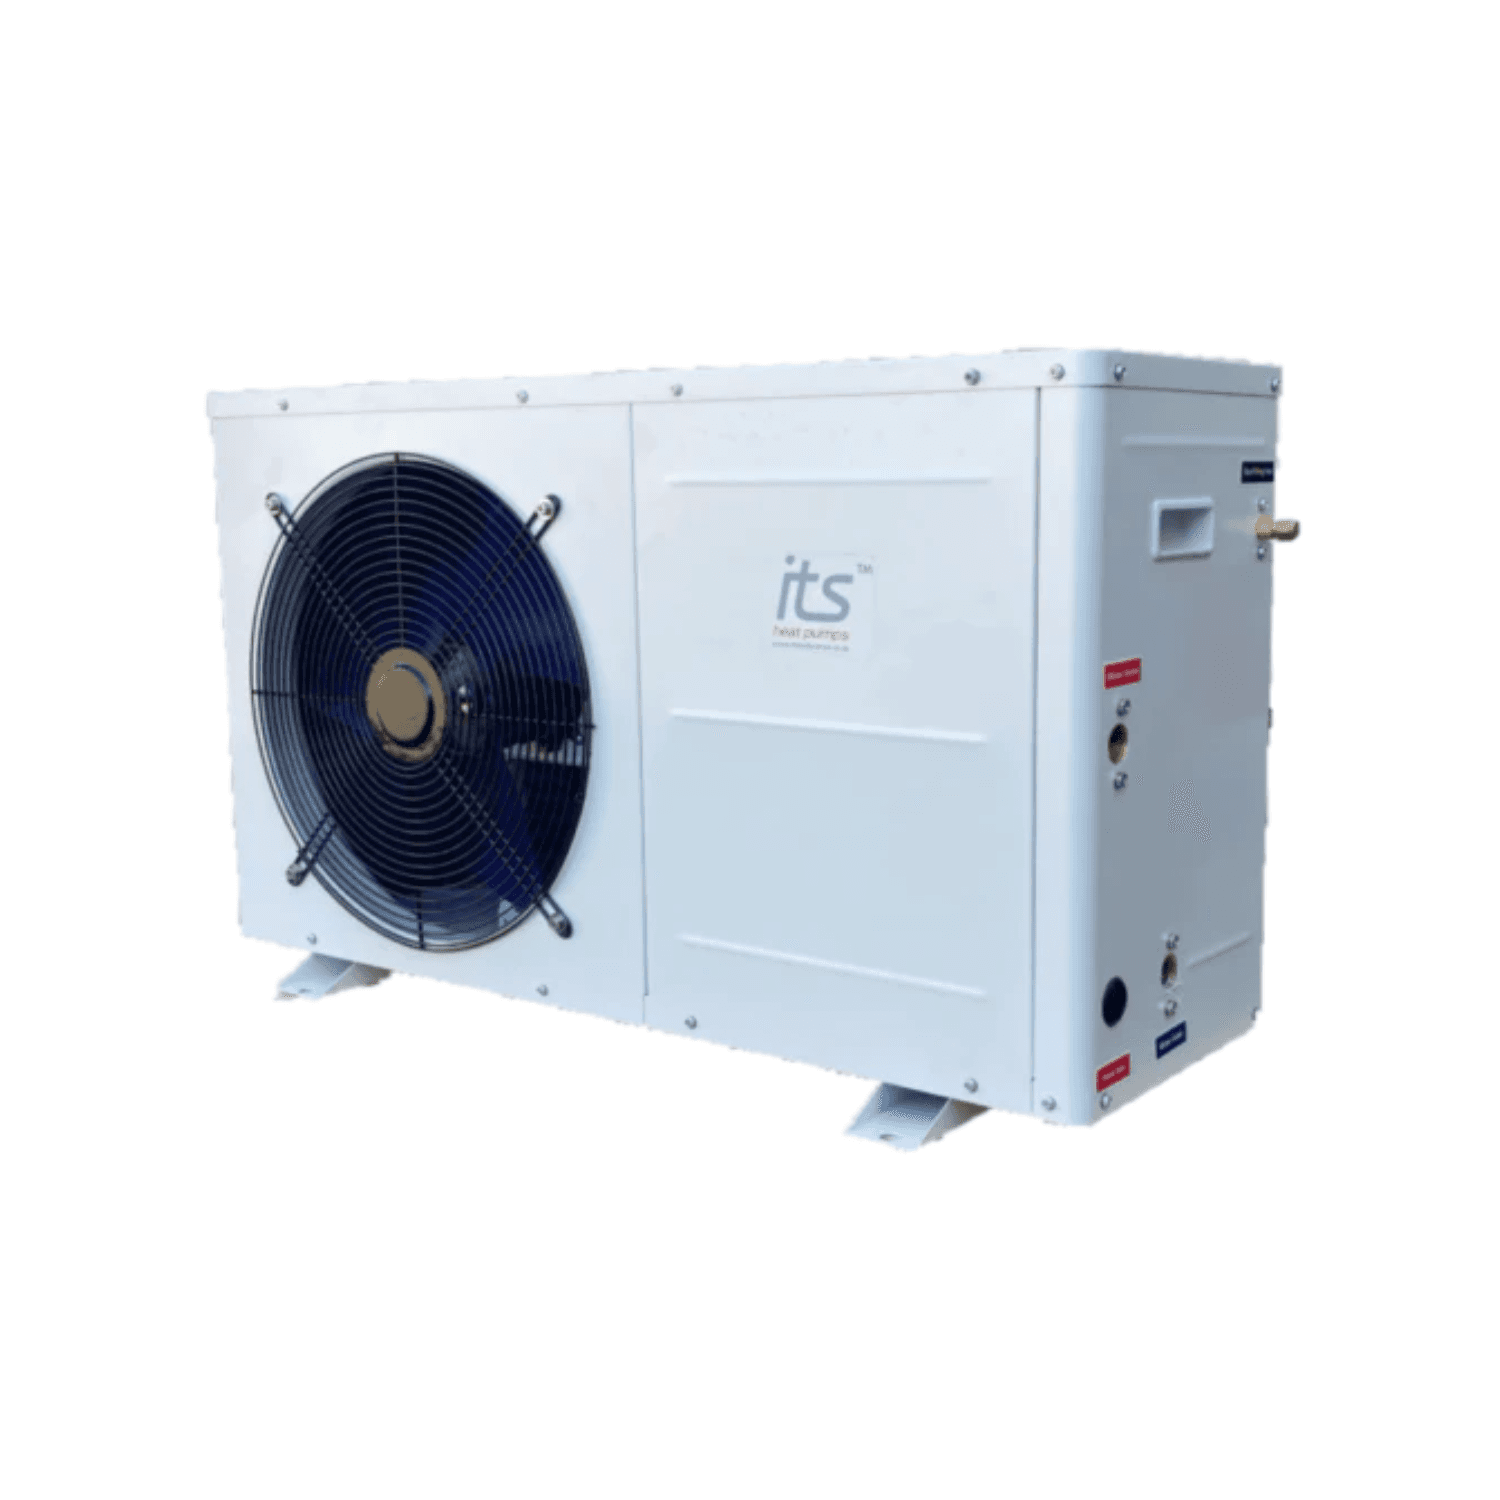 Product ITS Hot Water Heat Pump for Geyser 5.4kW (up to 400L) image